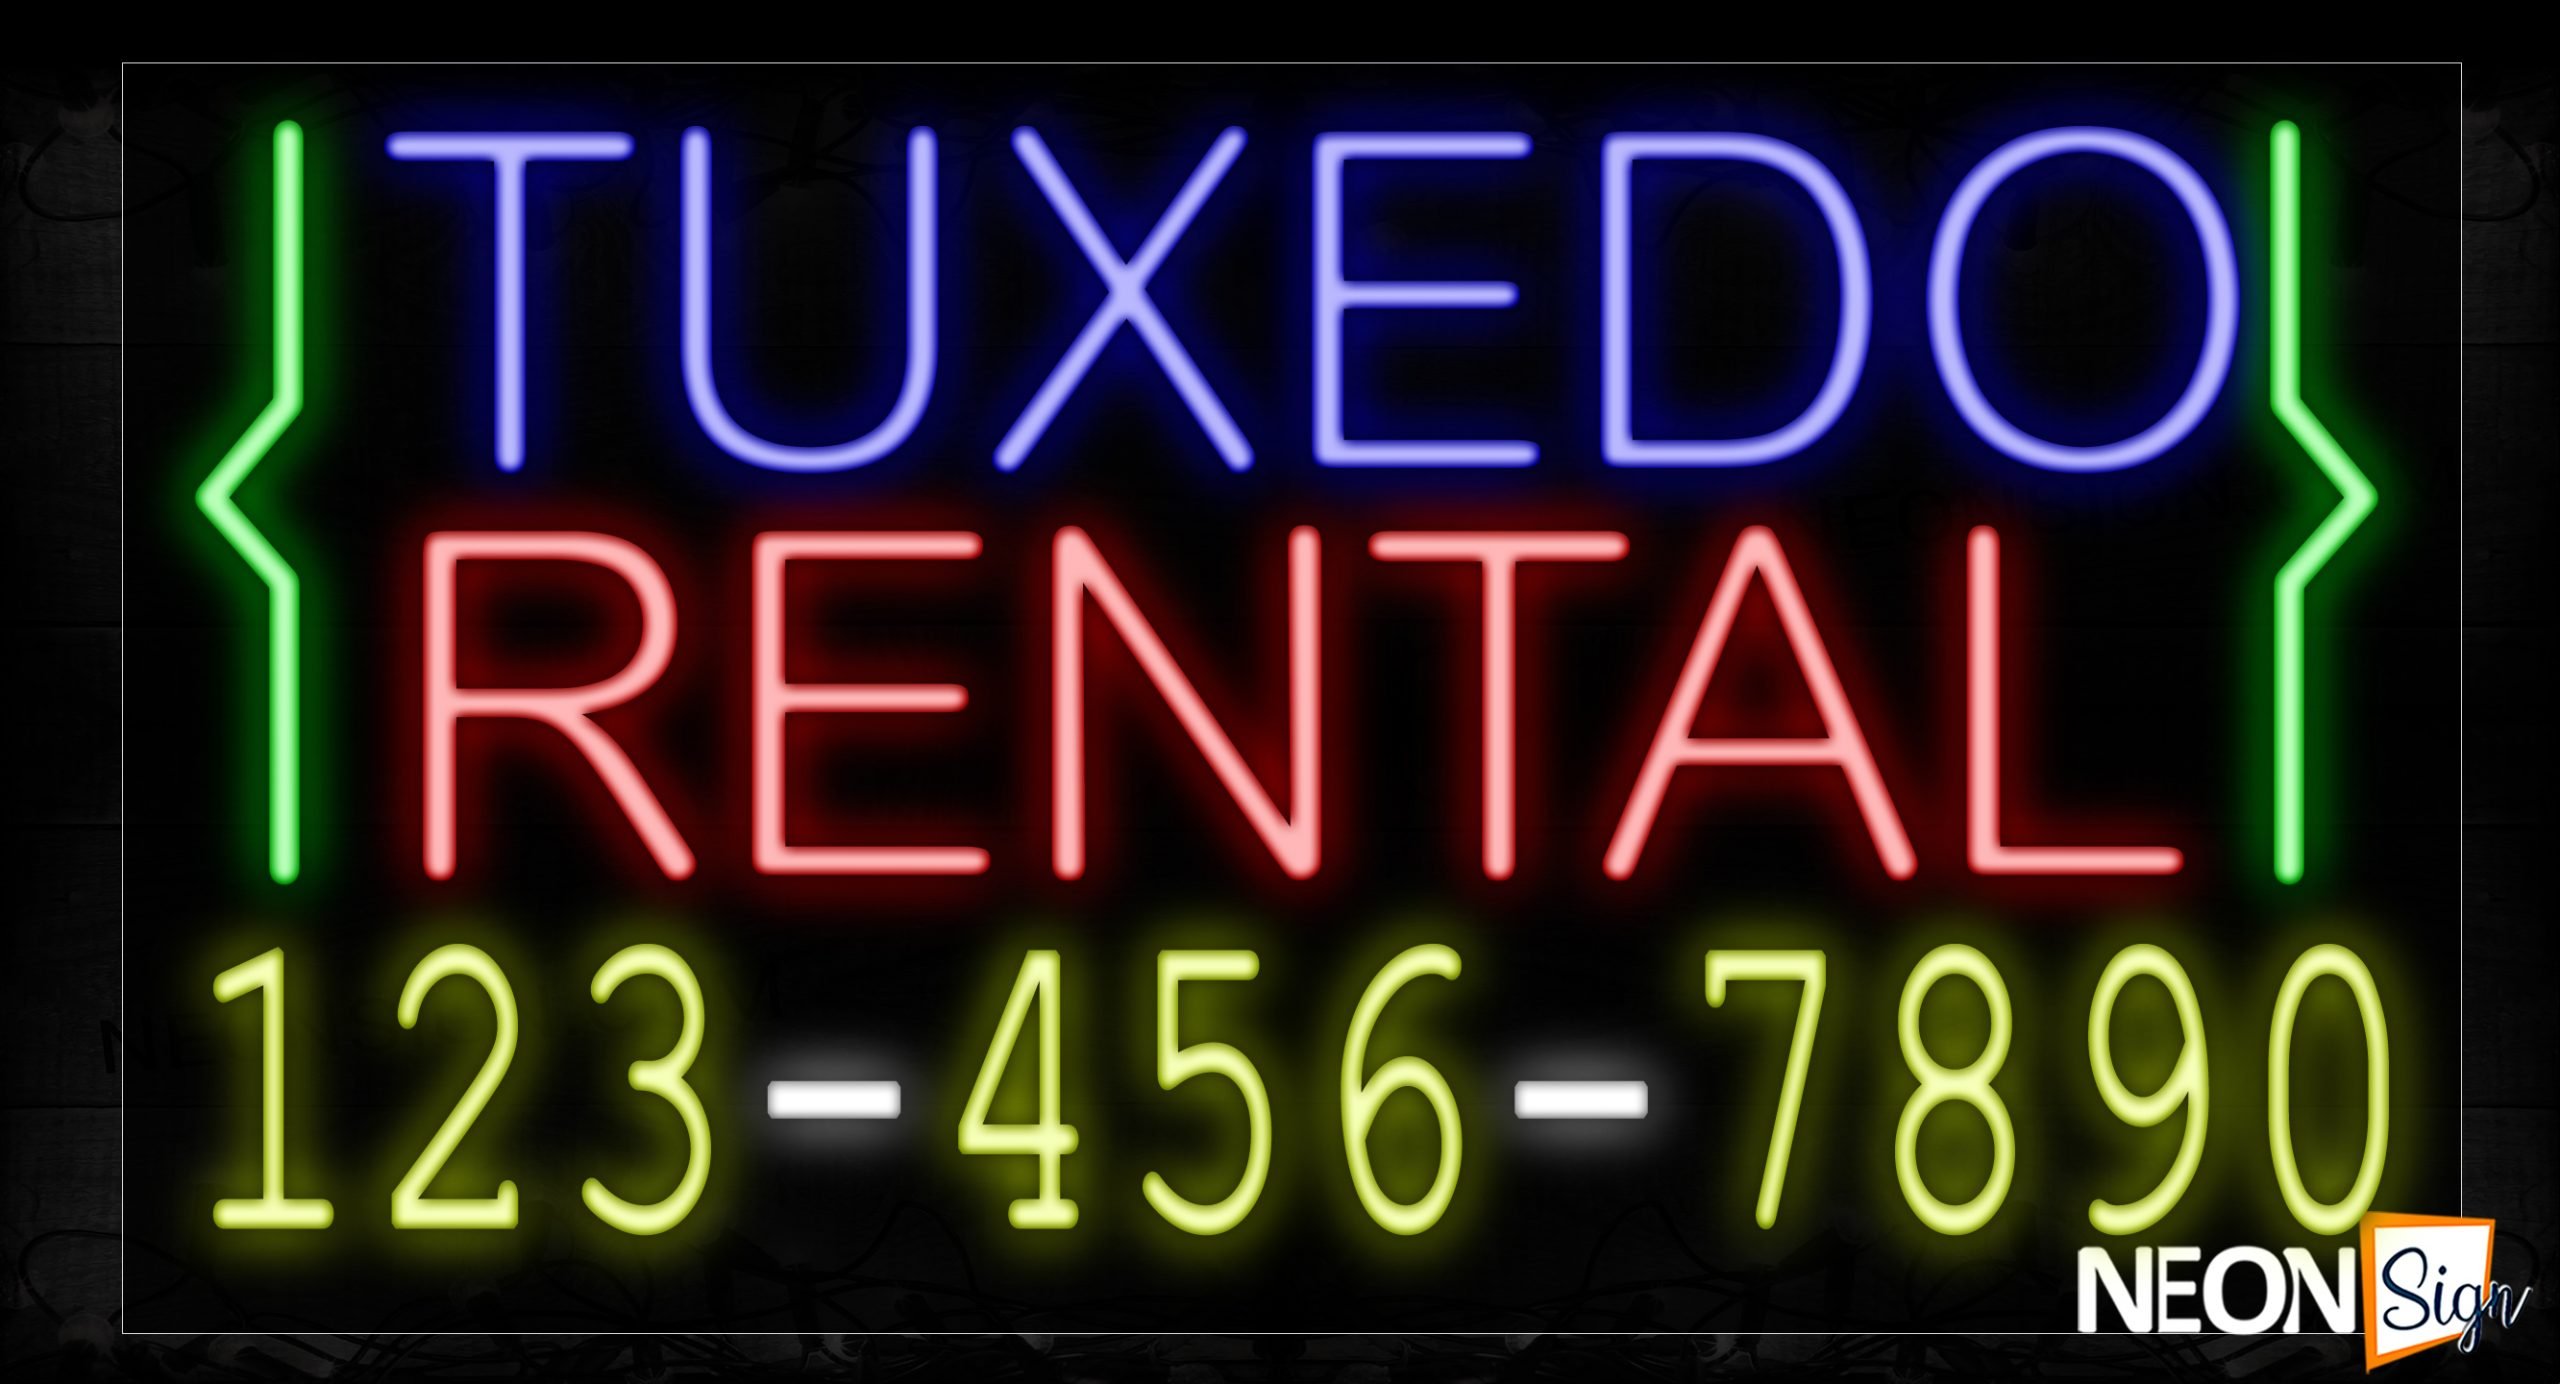 Image of 15114 Tuxedo Rental With Contact No Neon Signs_20x37 Black Backing